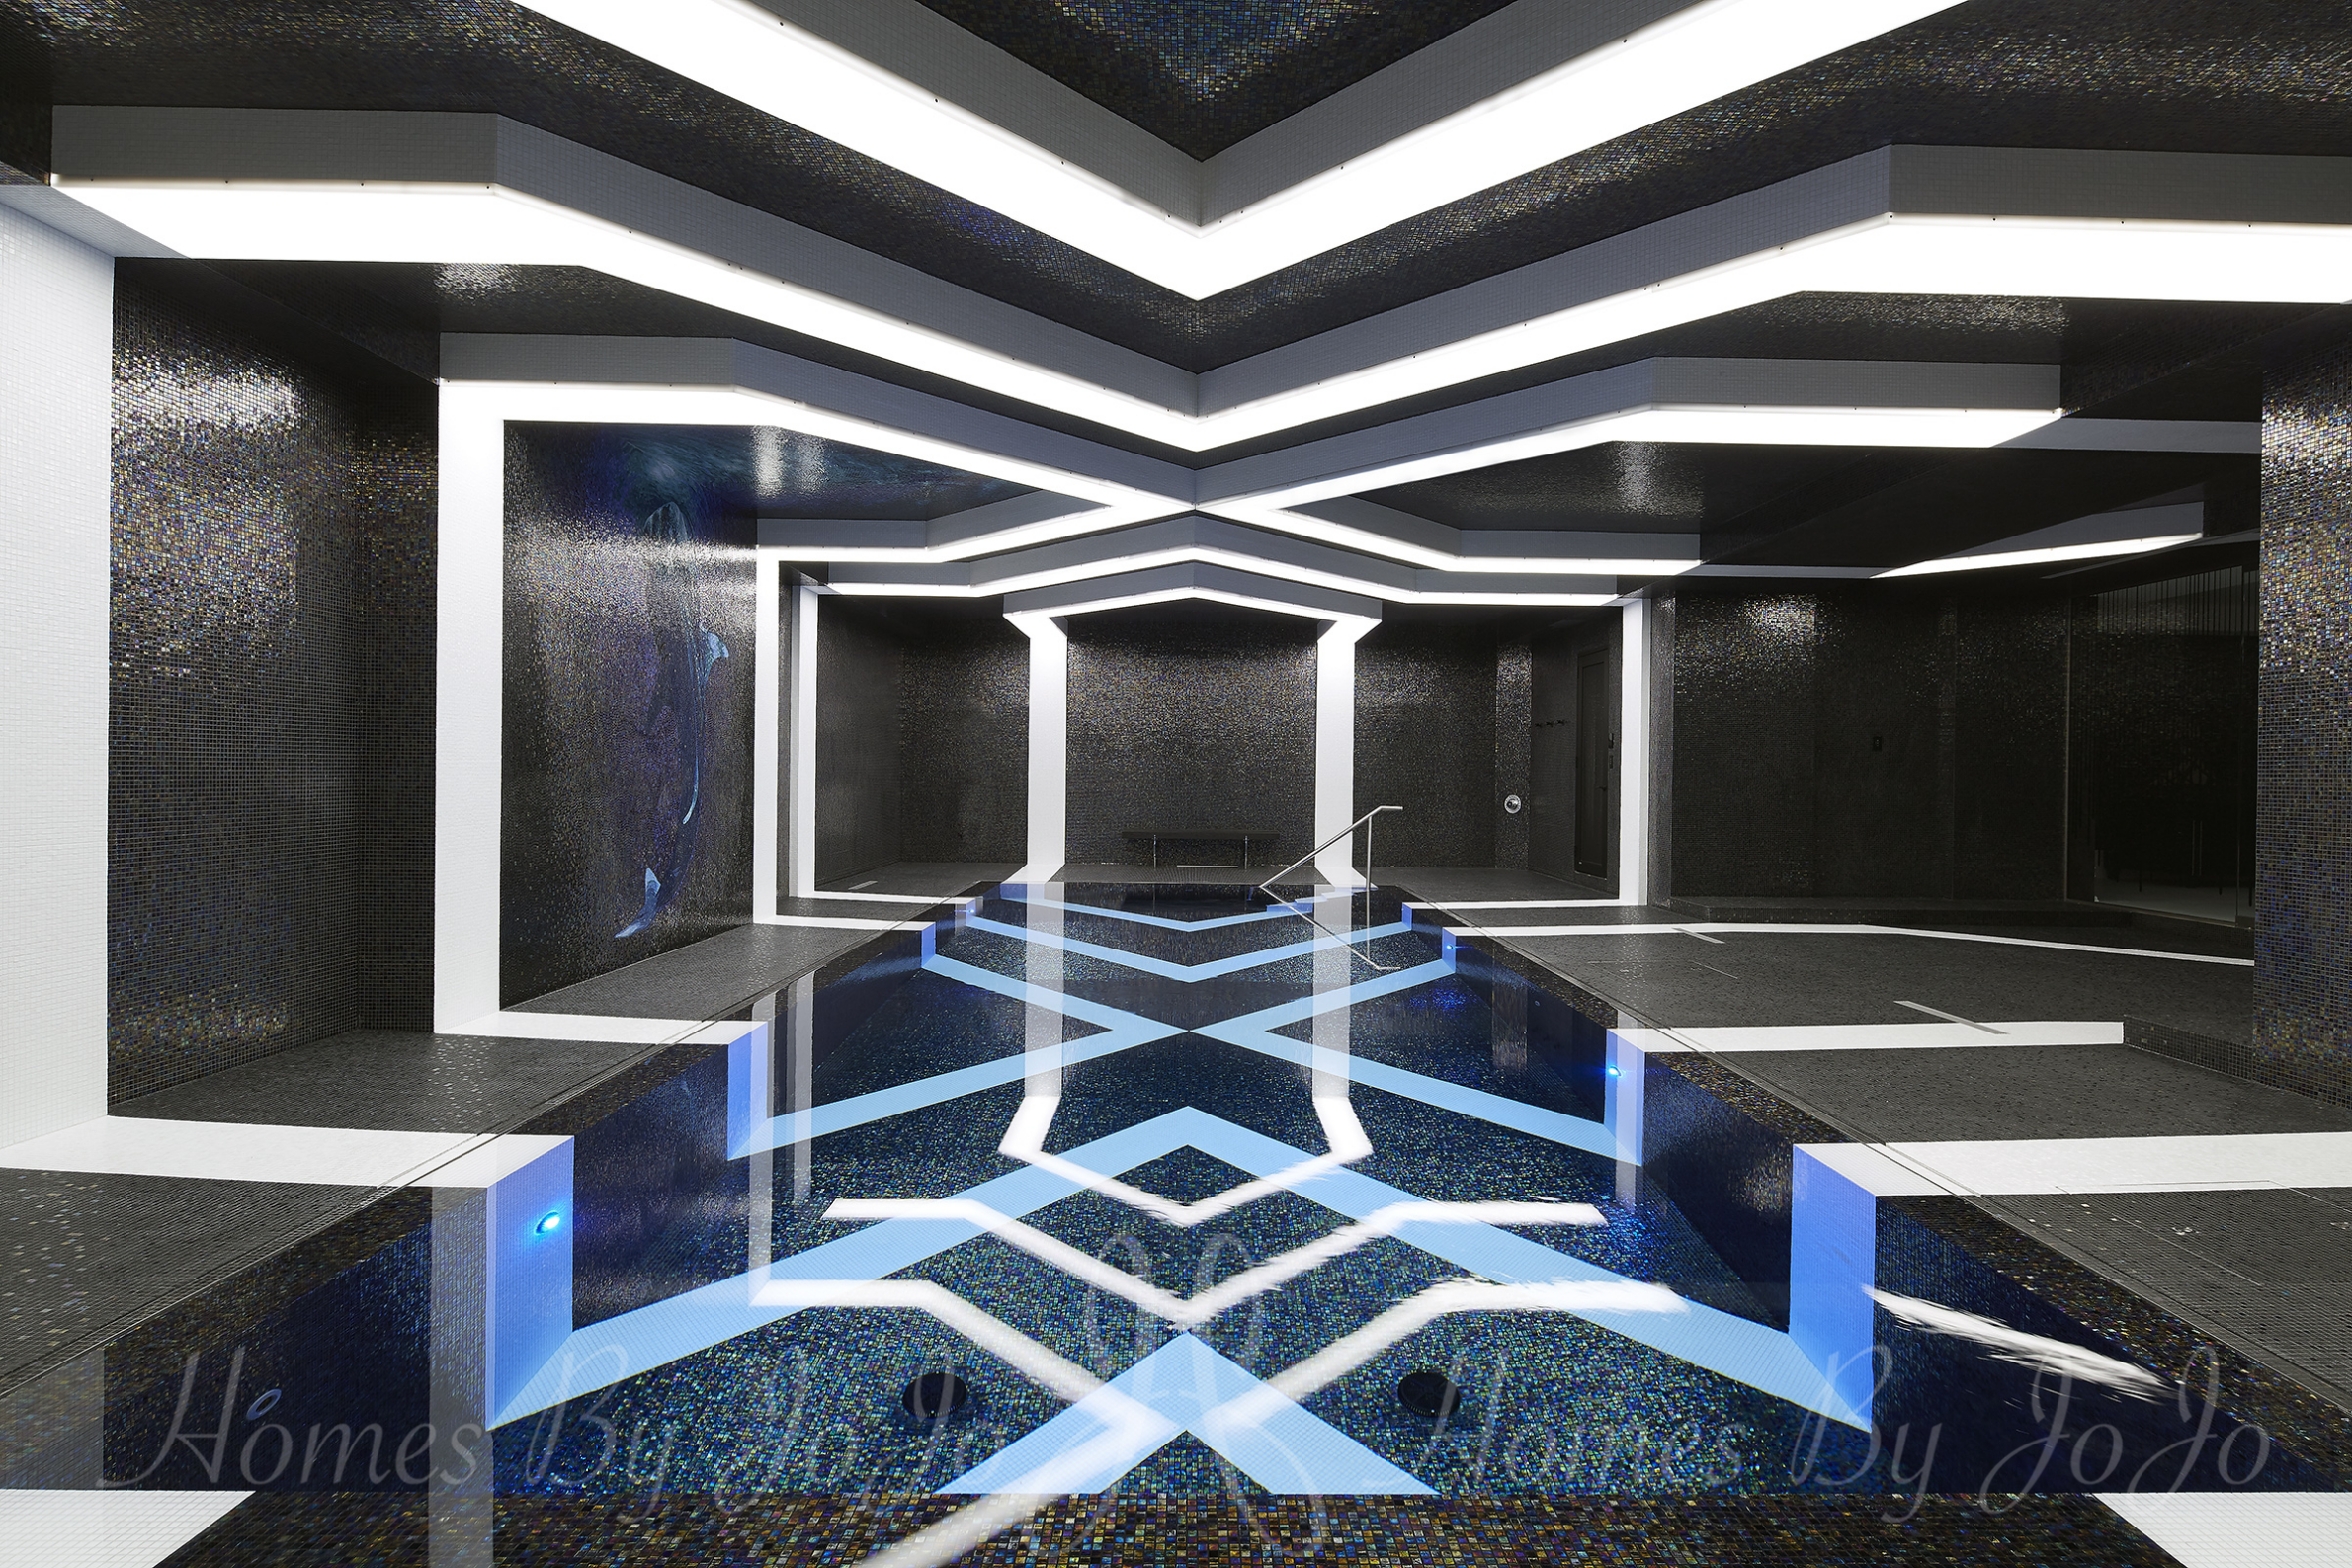 A futuristic indoor swimming pool with bold geometric patterns surrounded by raised white geometric lines on black walls